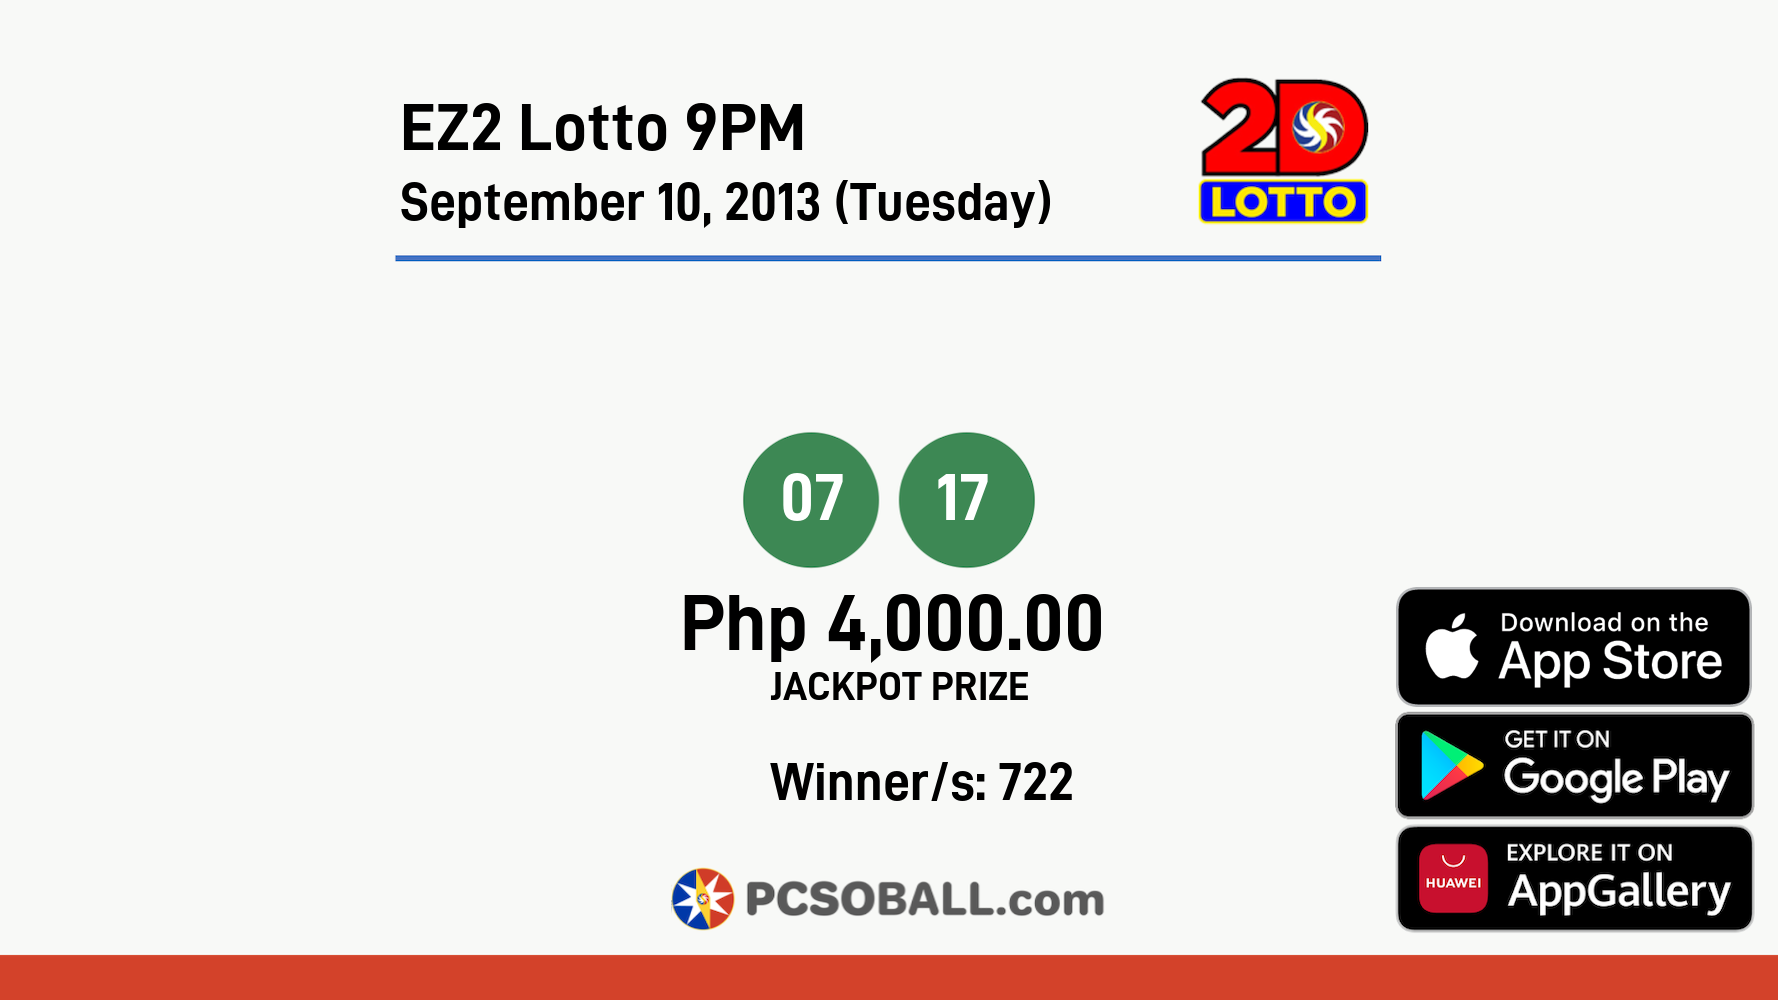 EZ2 Lotto 9PM September 10, 2013 (Tuesday) Result